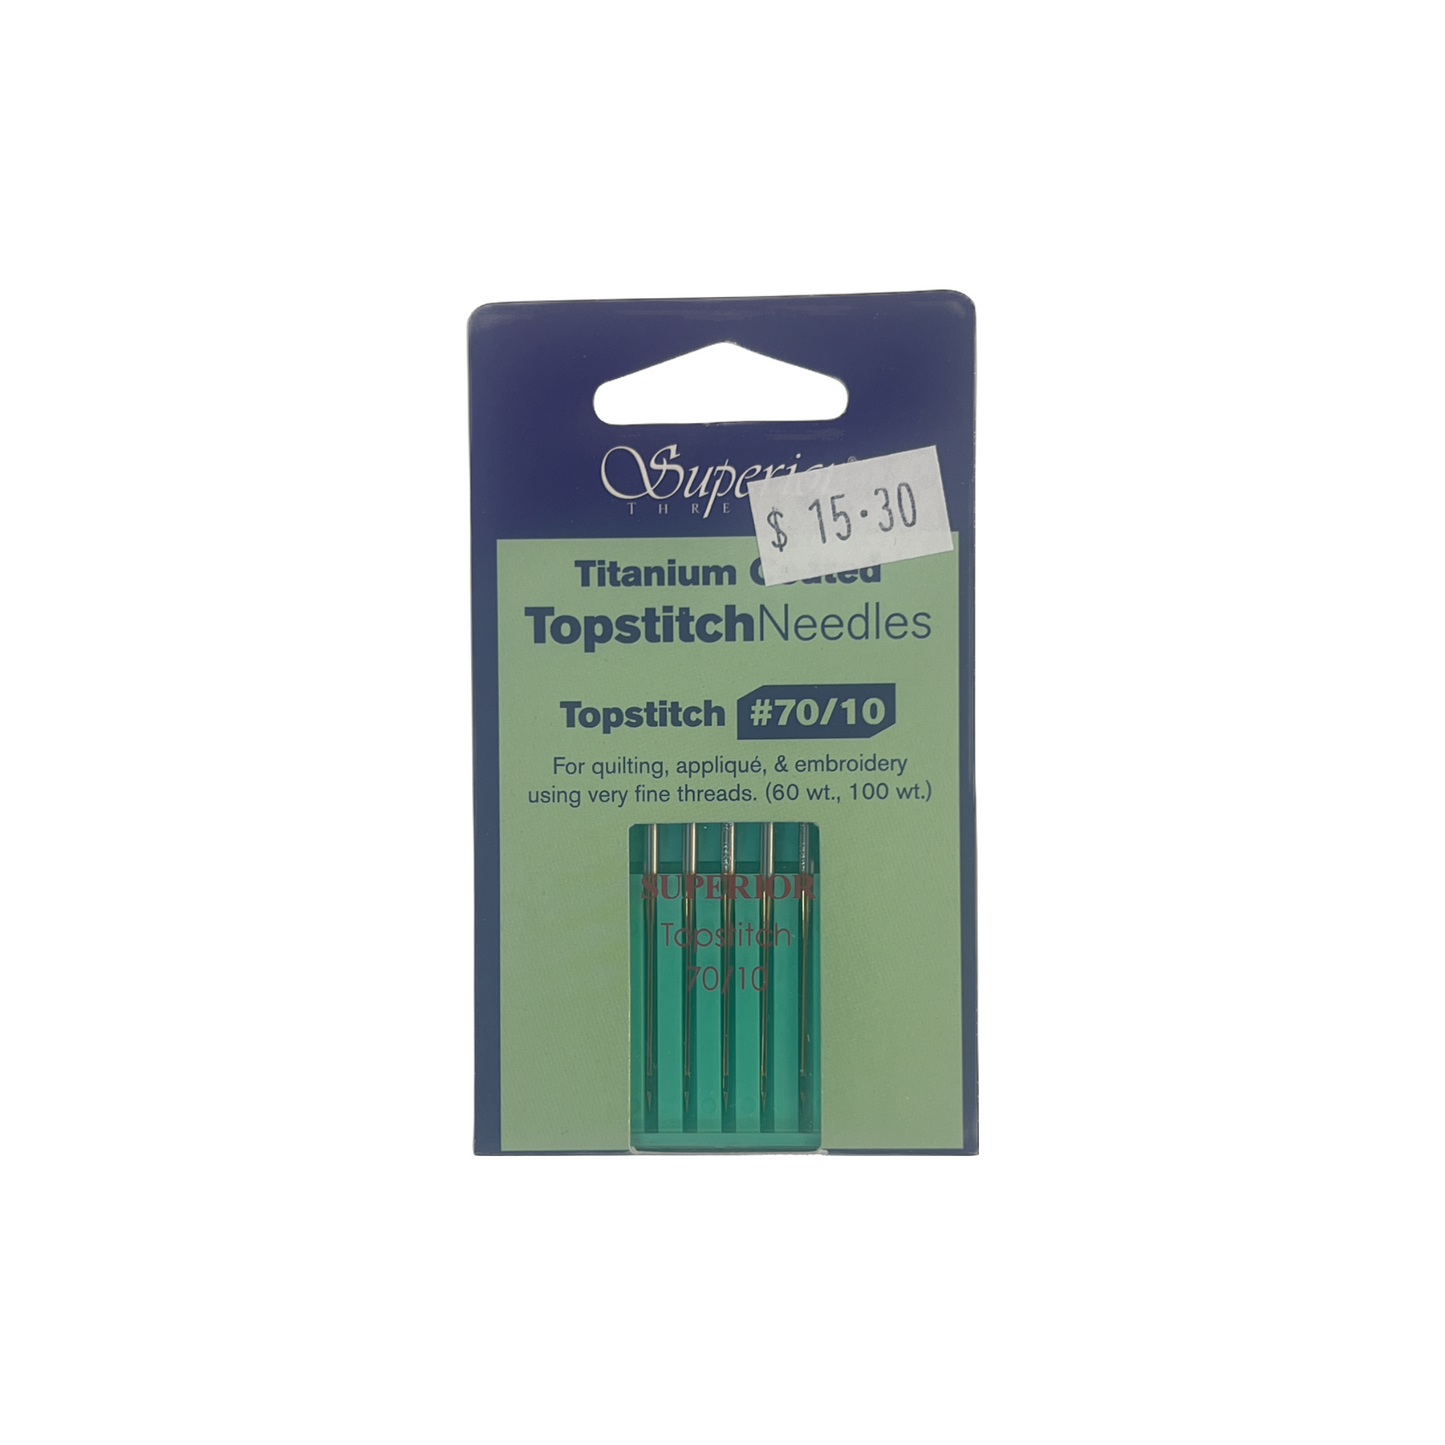 Topstitch Needles #70/10 - for Quilting, Embroidery, and Sewing, 5 Count